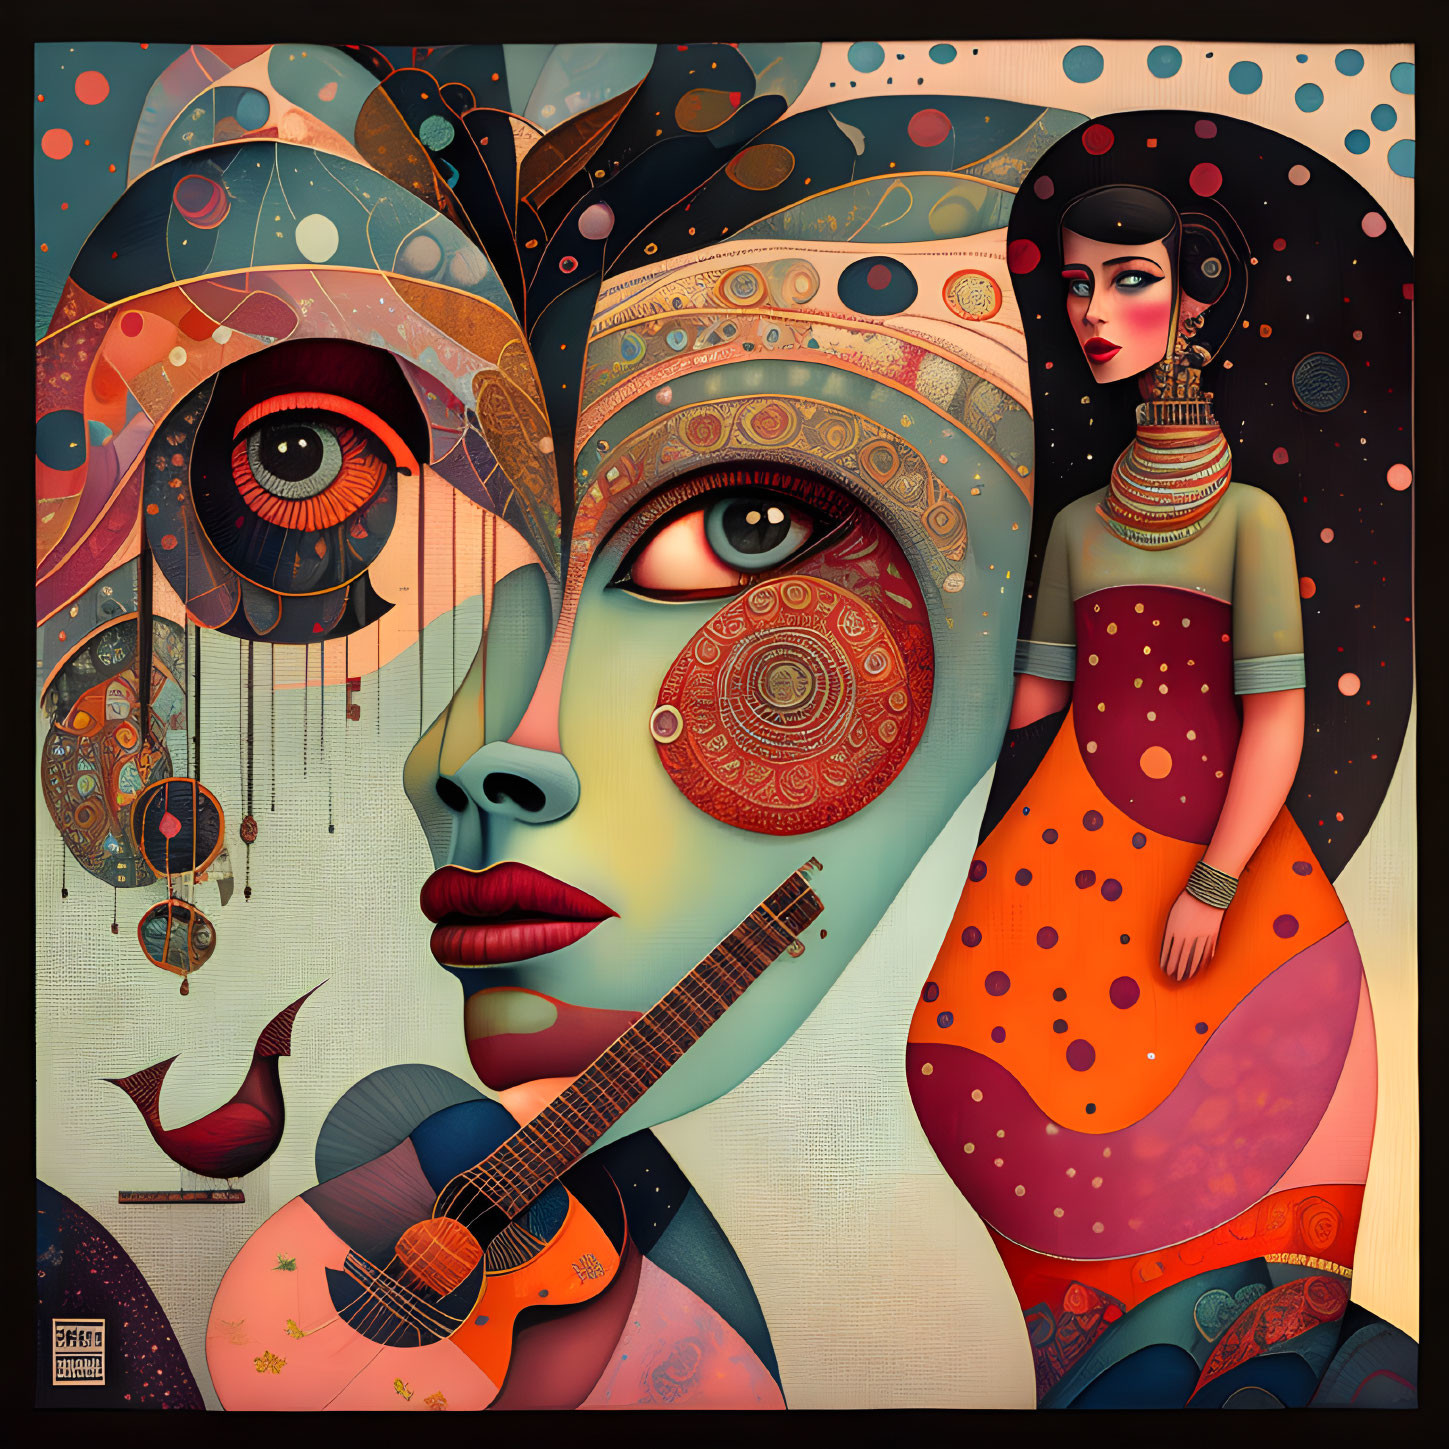 Vibrant surreal artwork with abstract woman faces and intricate patterns